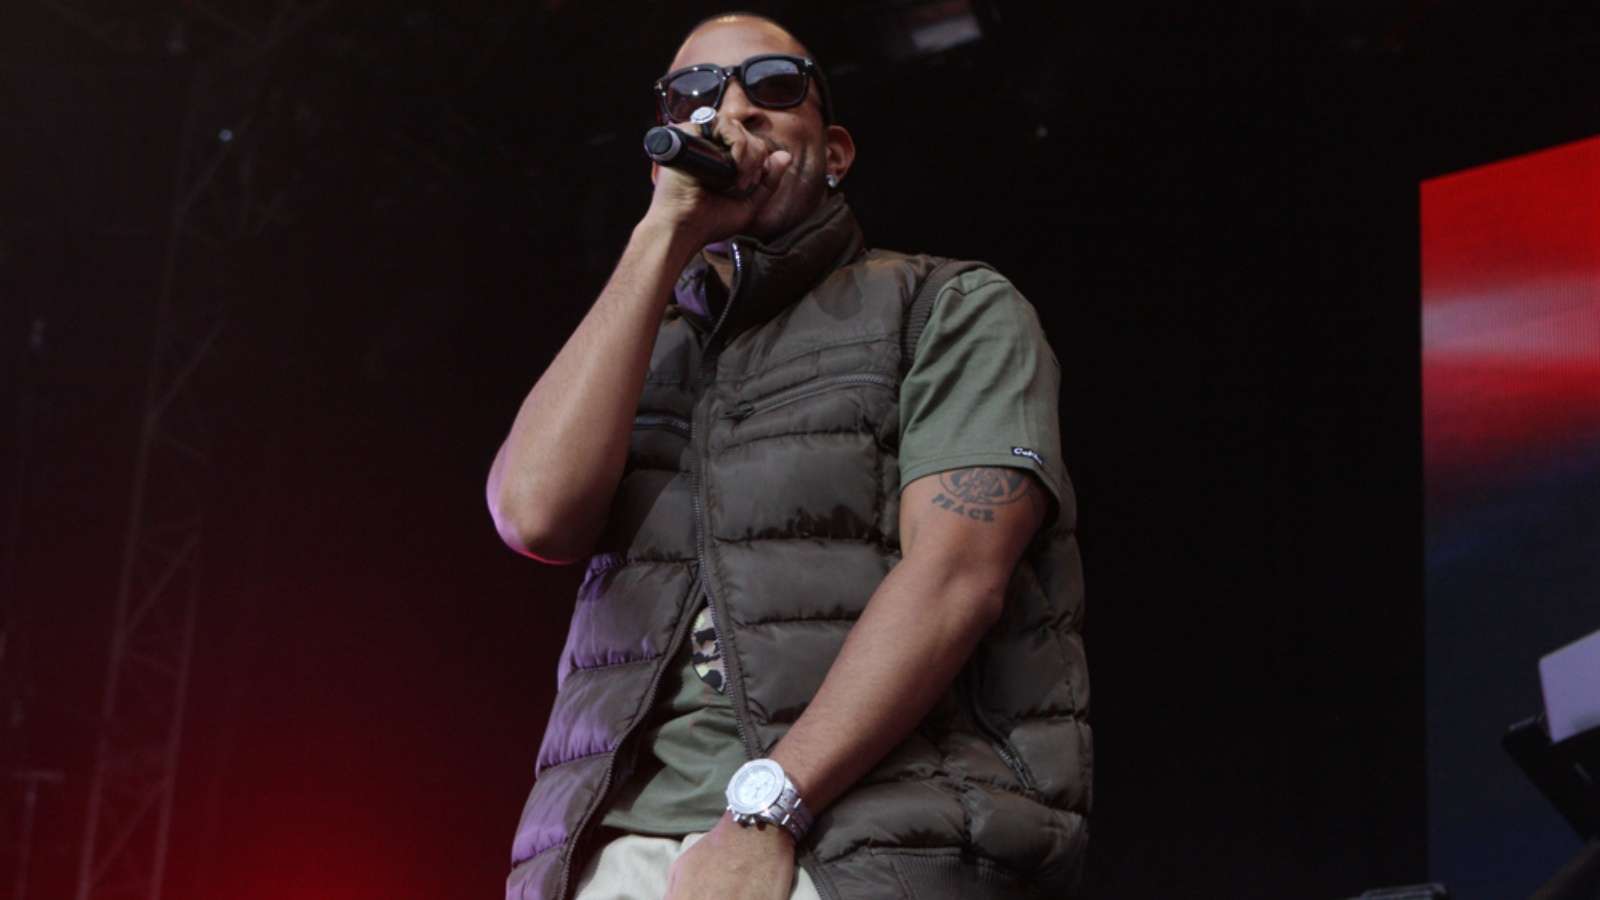 Ludacris performing onstage at a concert